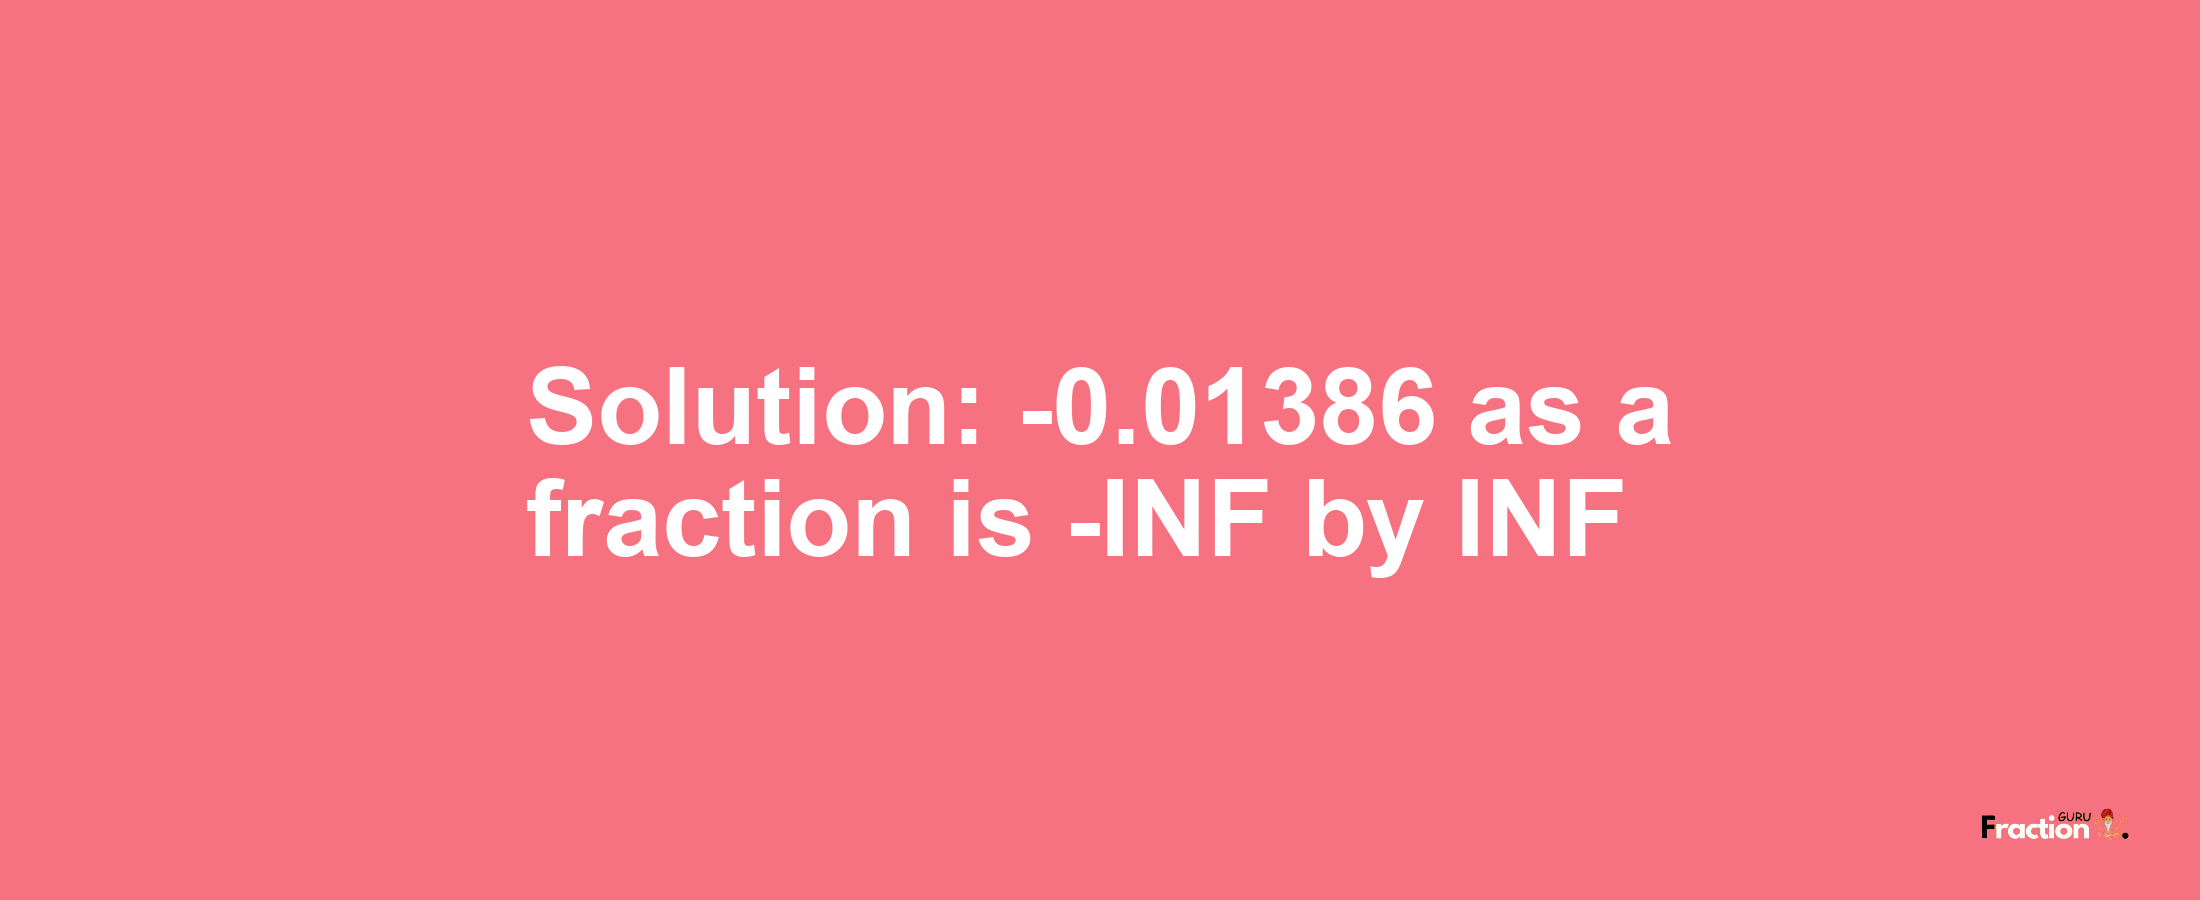 Solution:-0.01386 as a fraction is -INF/INF